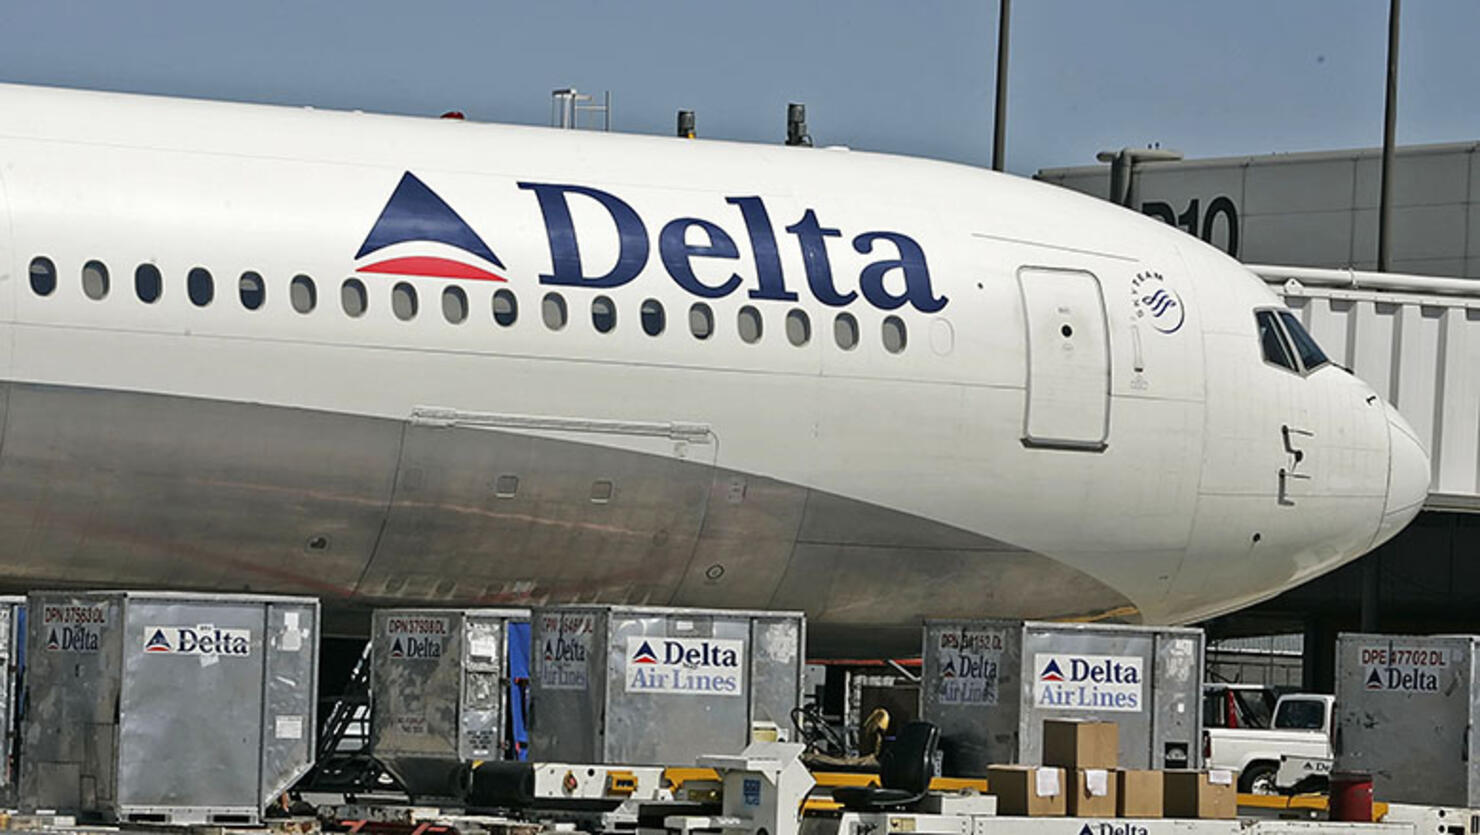  A Delta Airlines jet is prepared for flight 